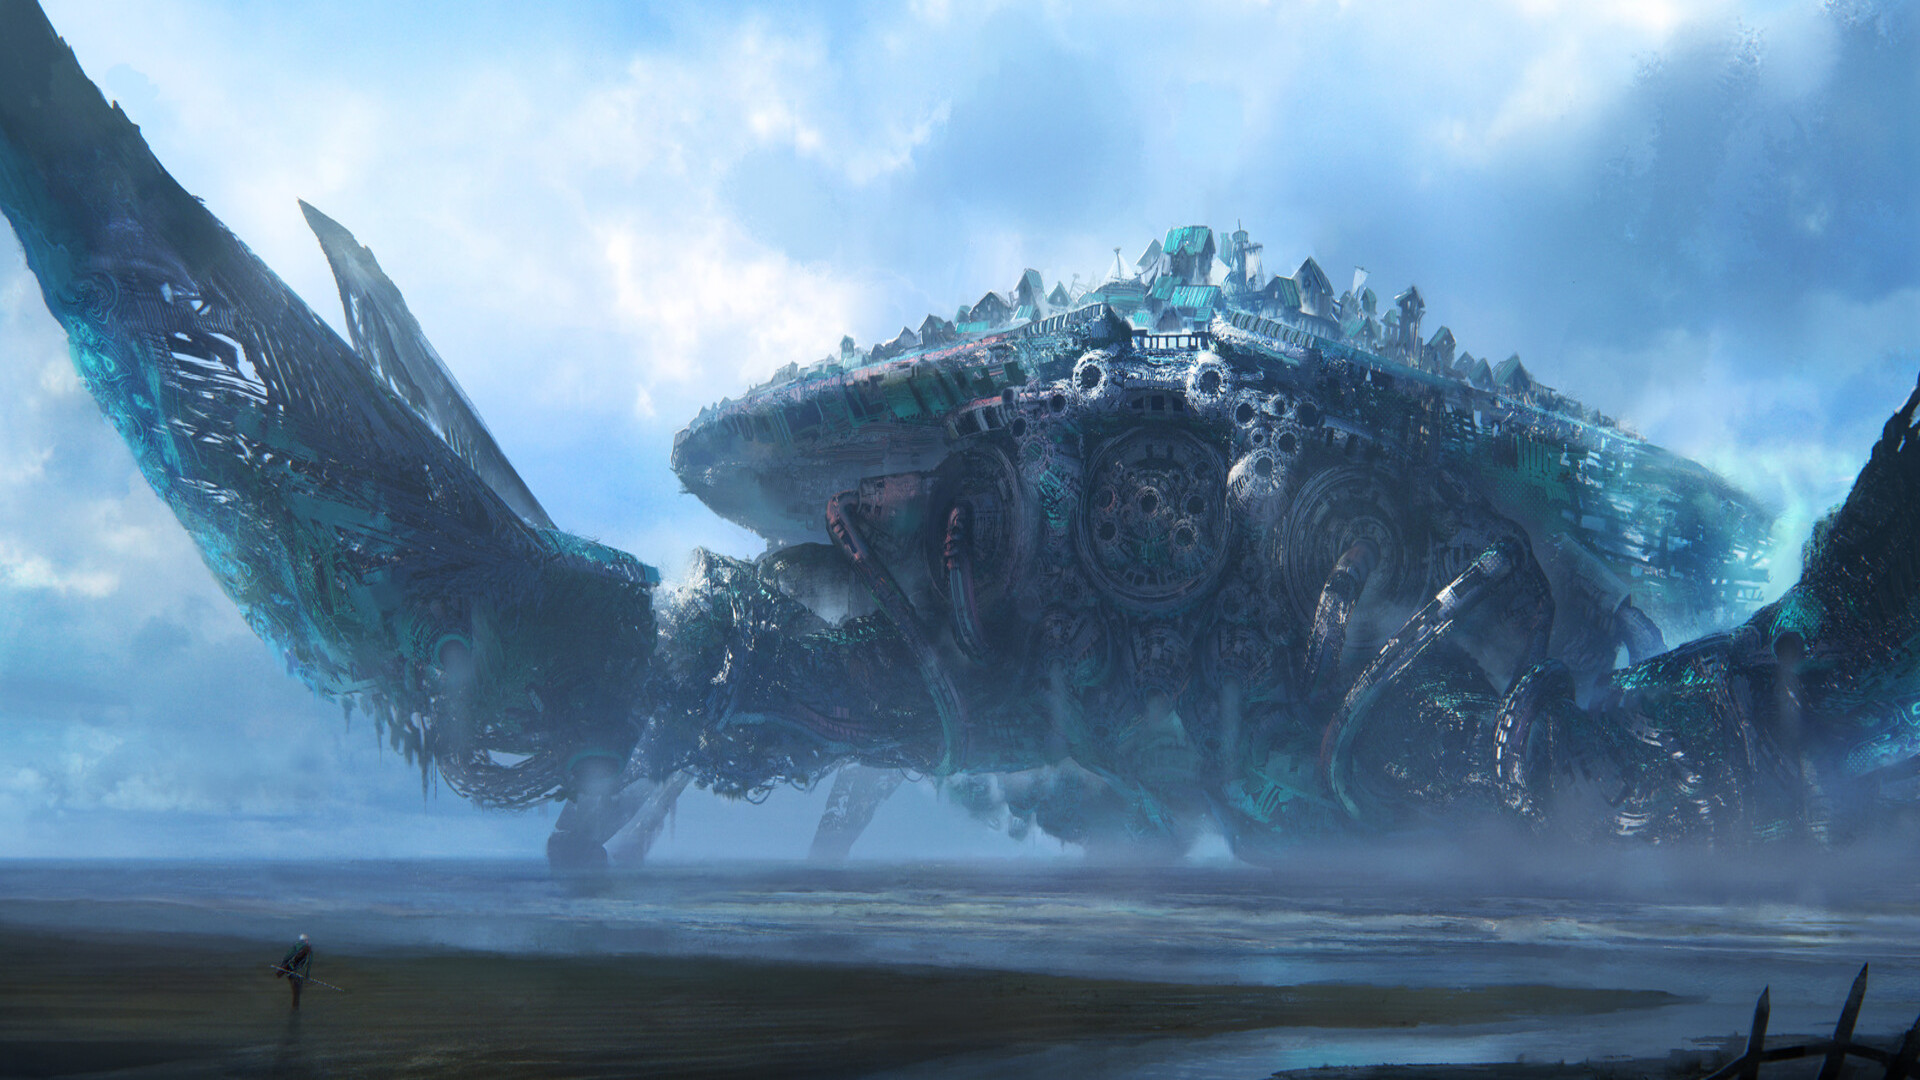 Giant mechanical crab city by Leon Tukker